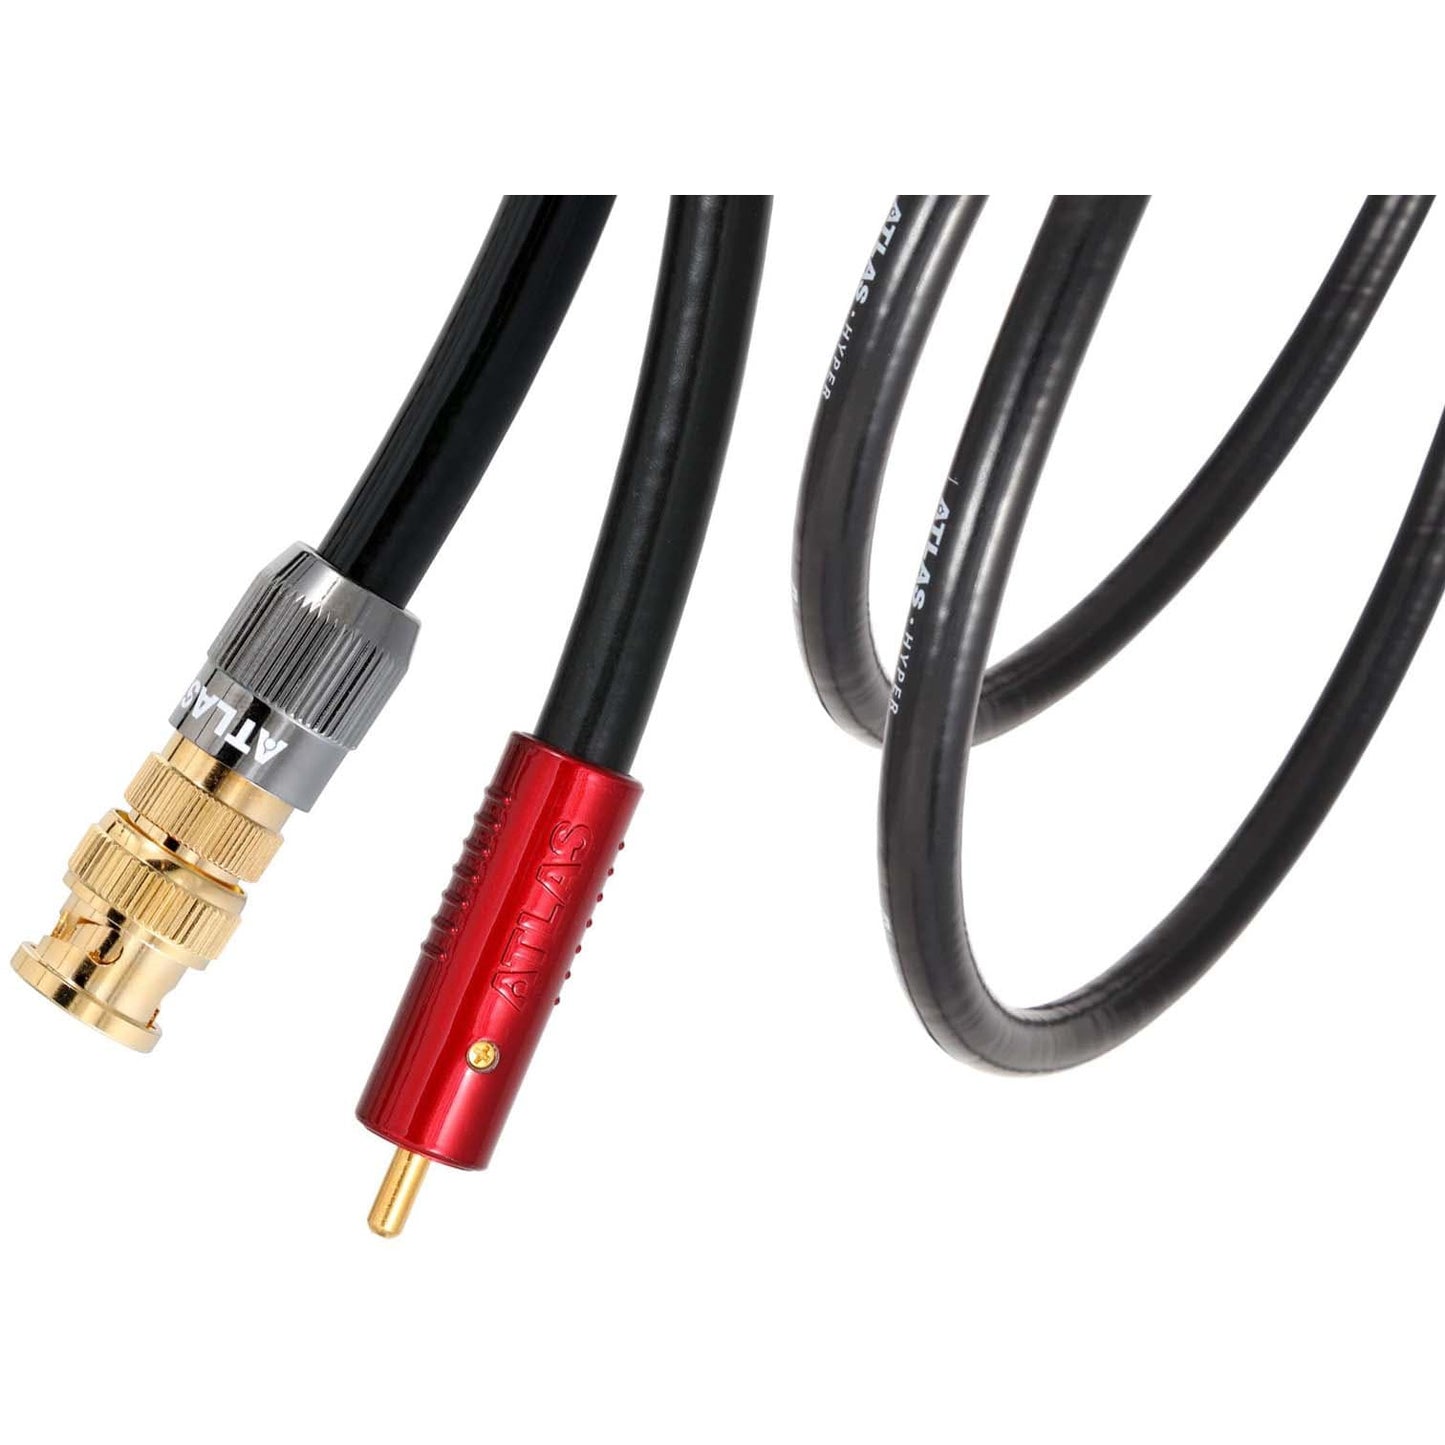 Atlas Asimi Ultra RCA S/PDIF Interconnects